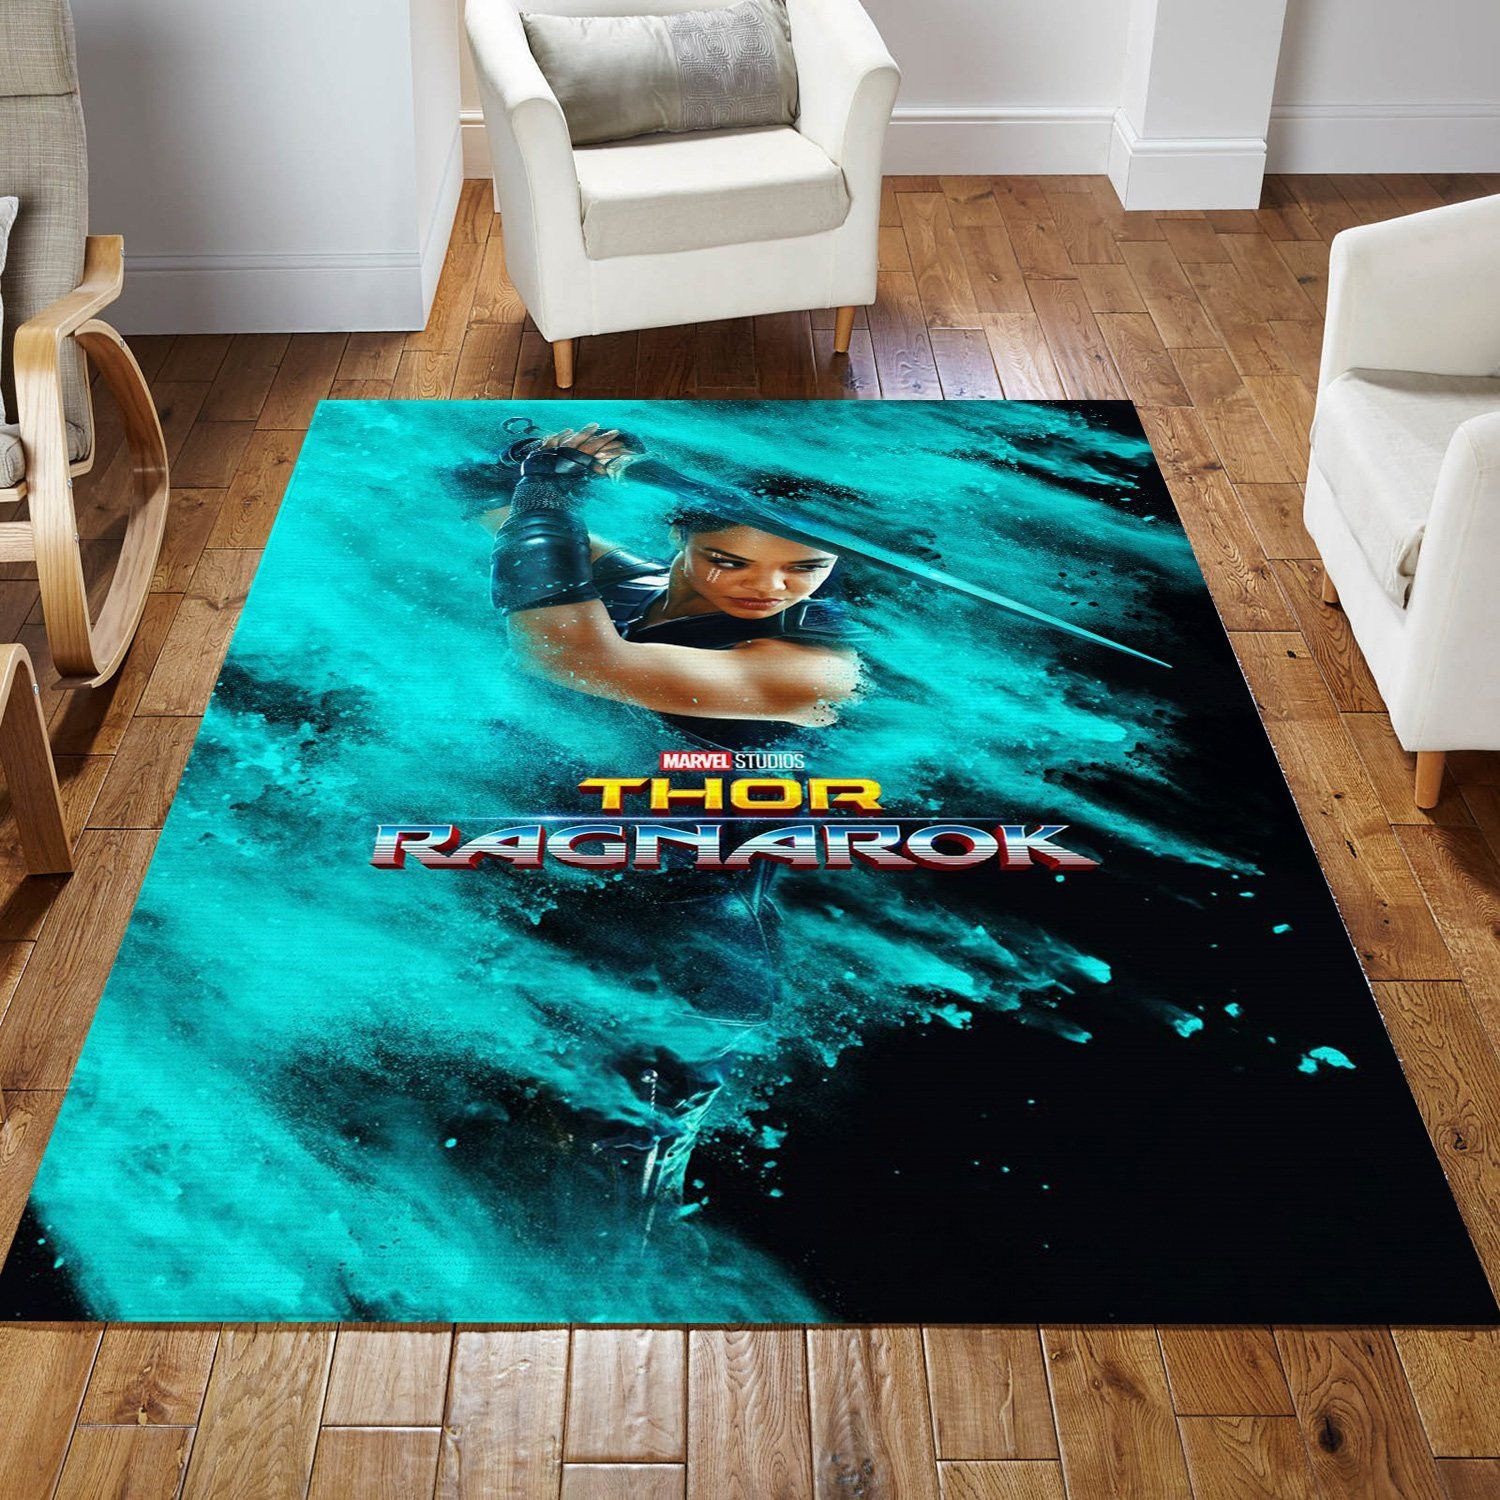 Thor Ragnarok Valkyrie Area Rug For Christmas, Bedroom, Christmas Gift US Decor - Indoor Outdoor Rugs 3